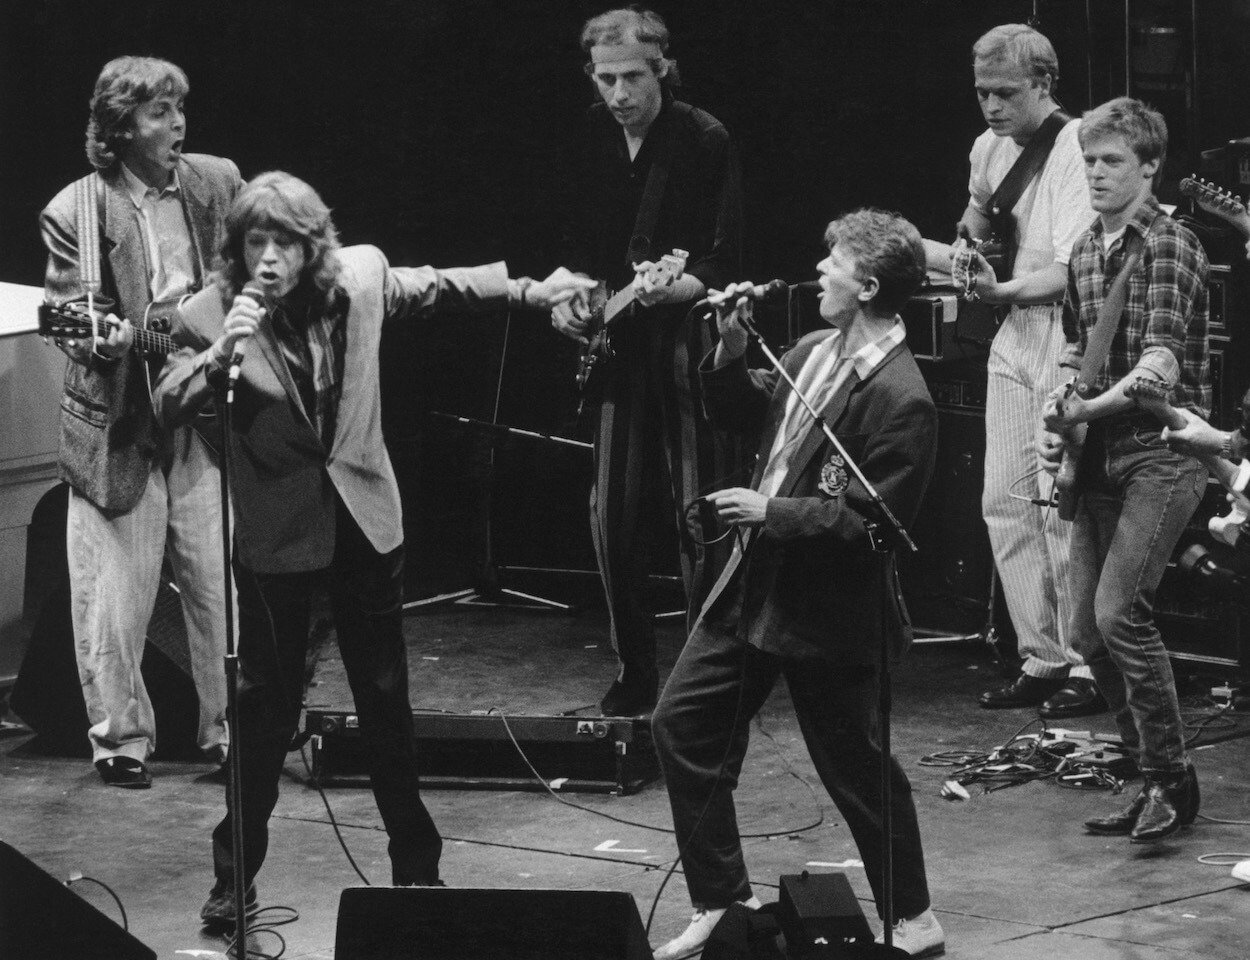 Dire Straits Did Something on the Charts That Beatles and Rolling Stones Never Could